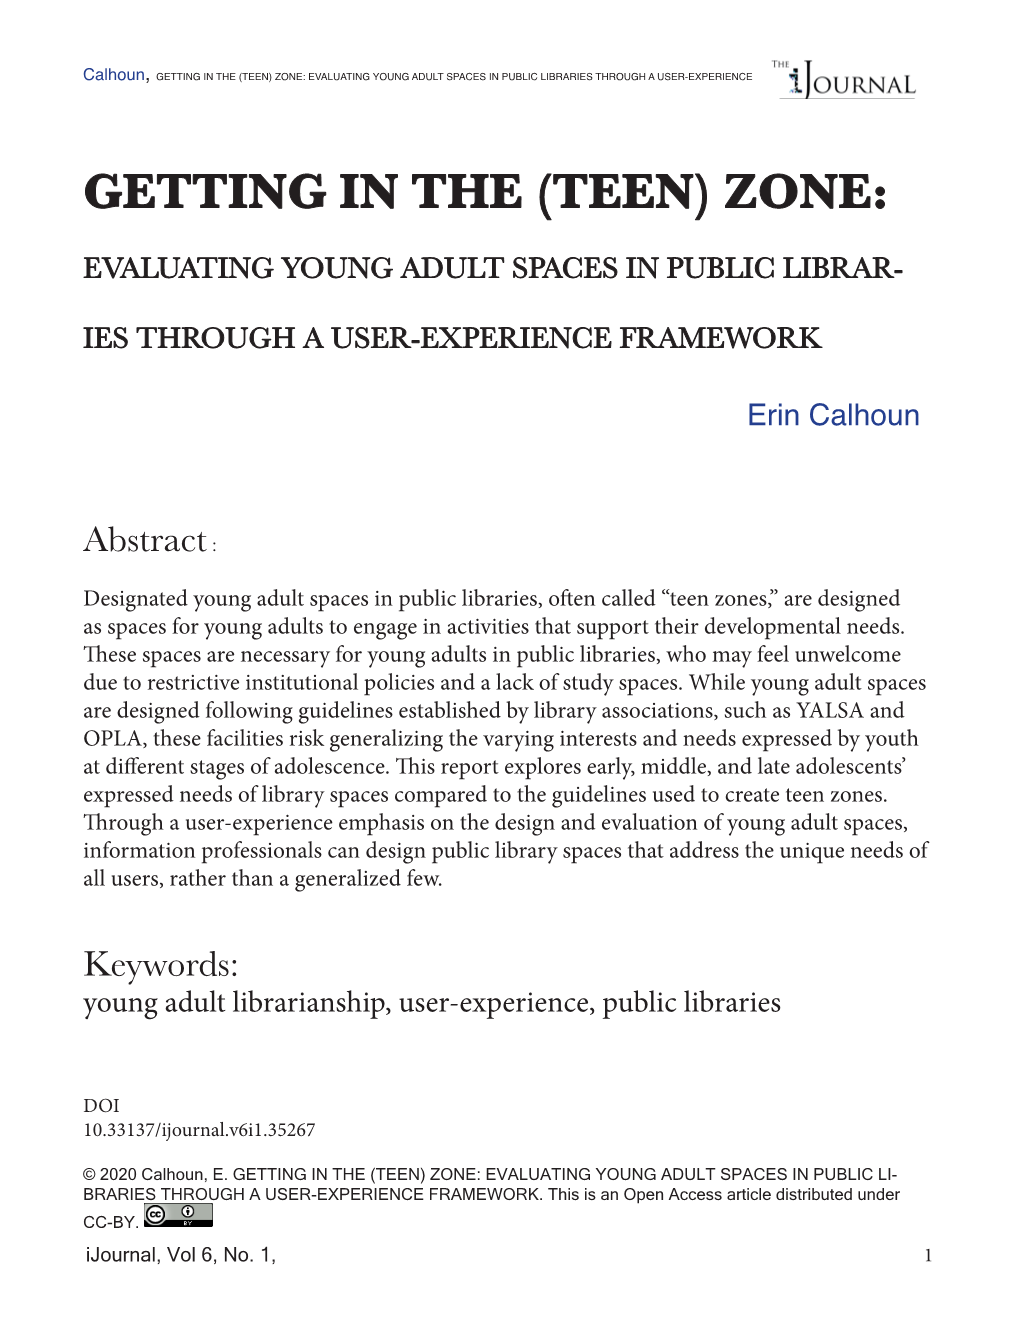 Teen) Zone: Evaluating Young Adult Spaces in Public Libraries Through a User-Experience